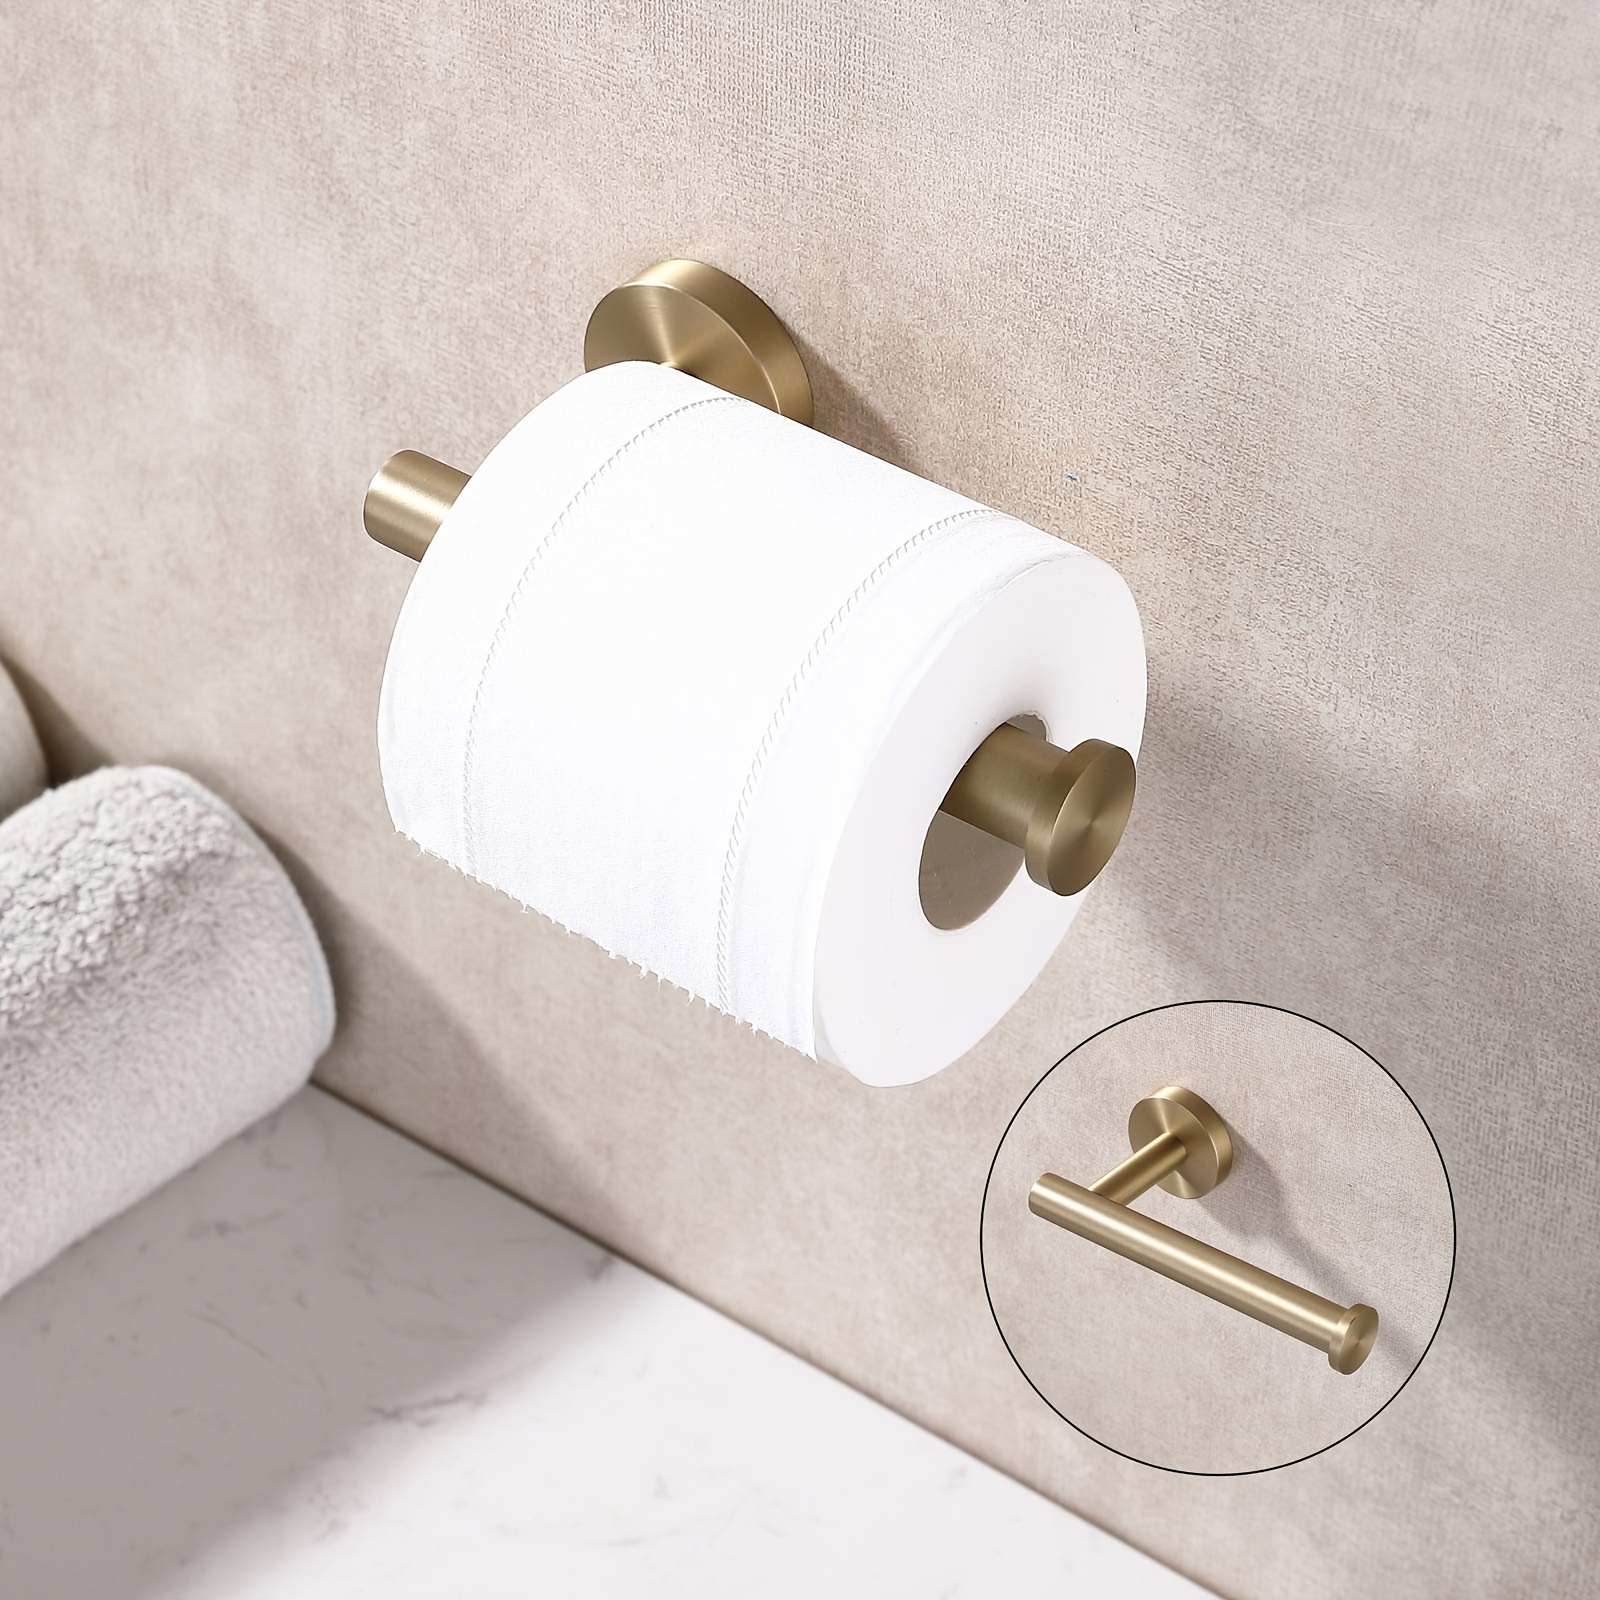 Toilet Roll Holder Stainless Steel Toilet Paper Holder Tissue Dispenser For  Bathroom And Kitchen Contemporary Style Wall Mounted Polished Steel